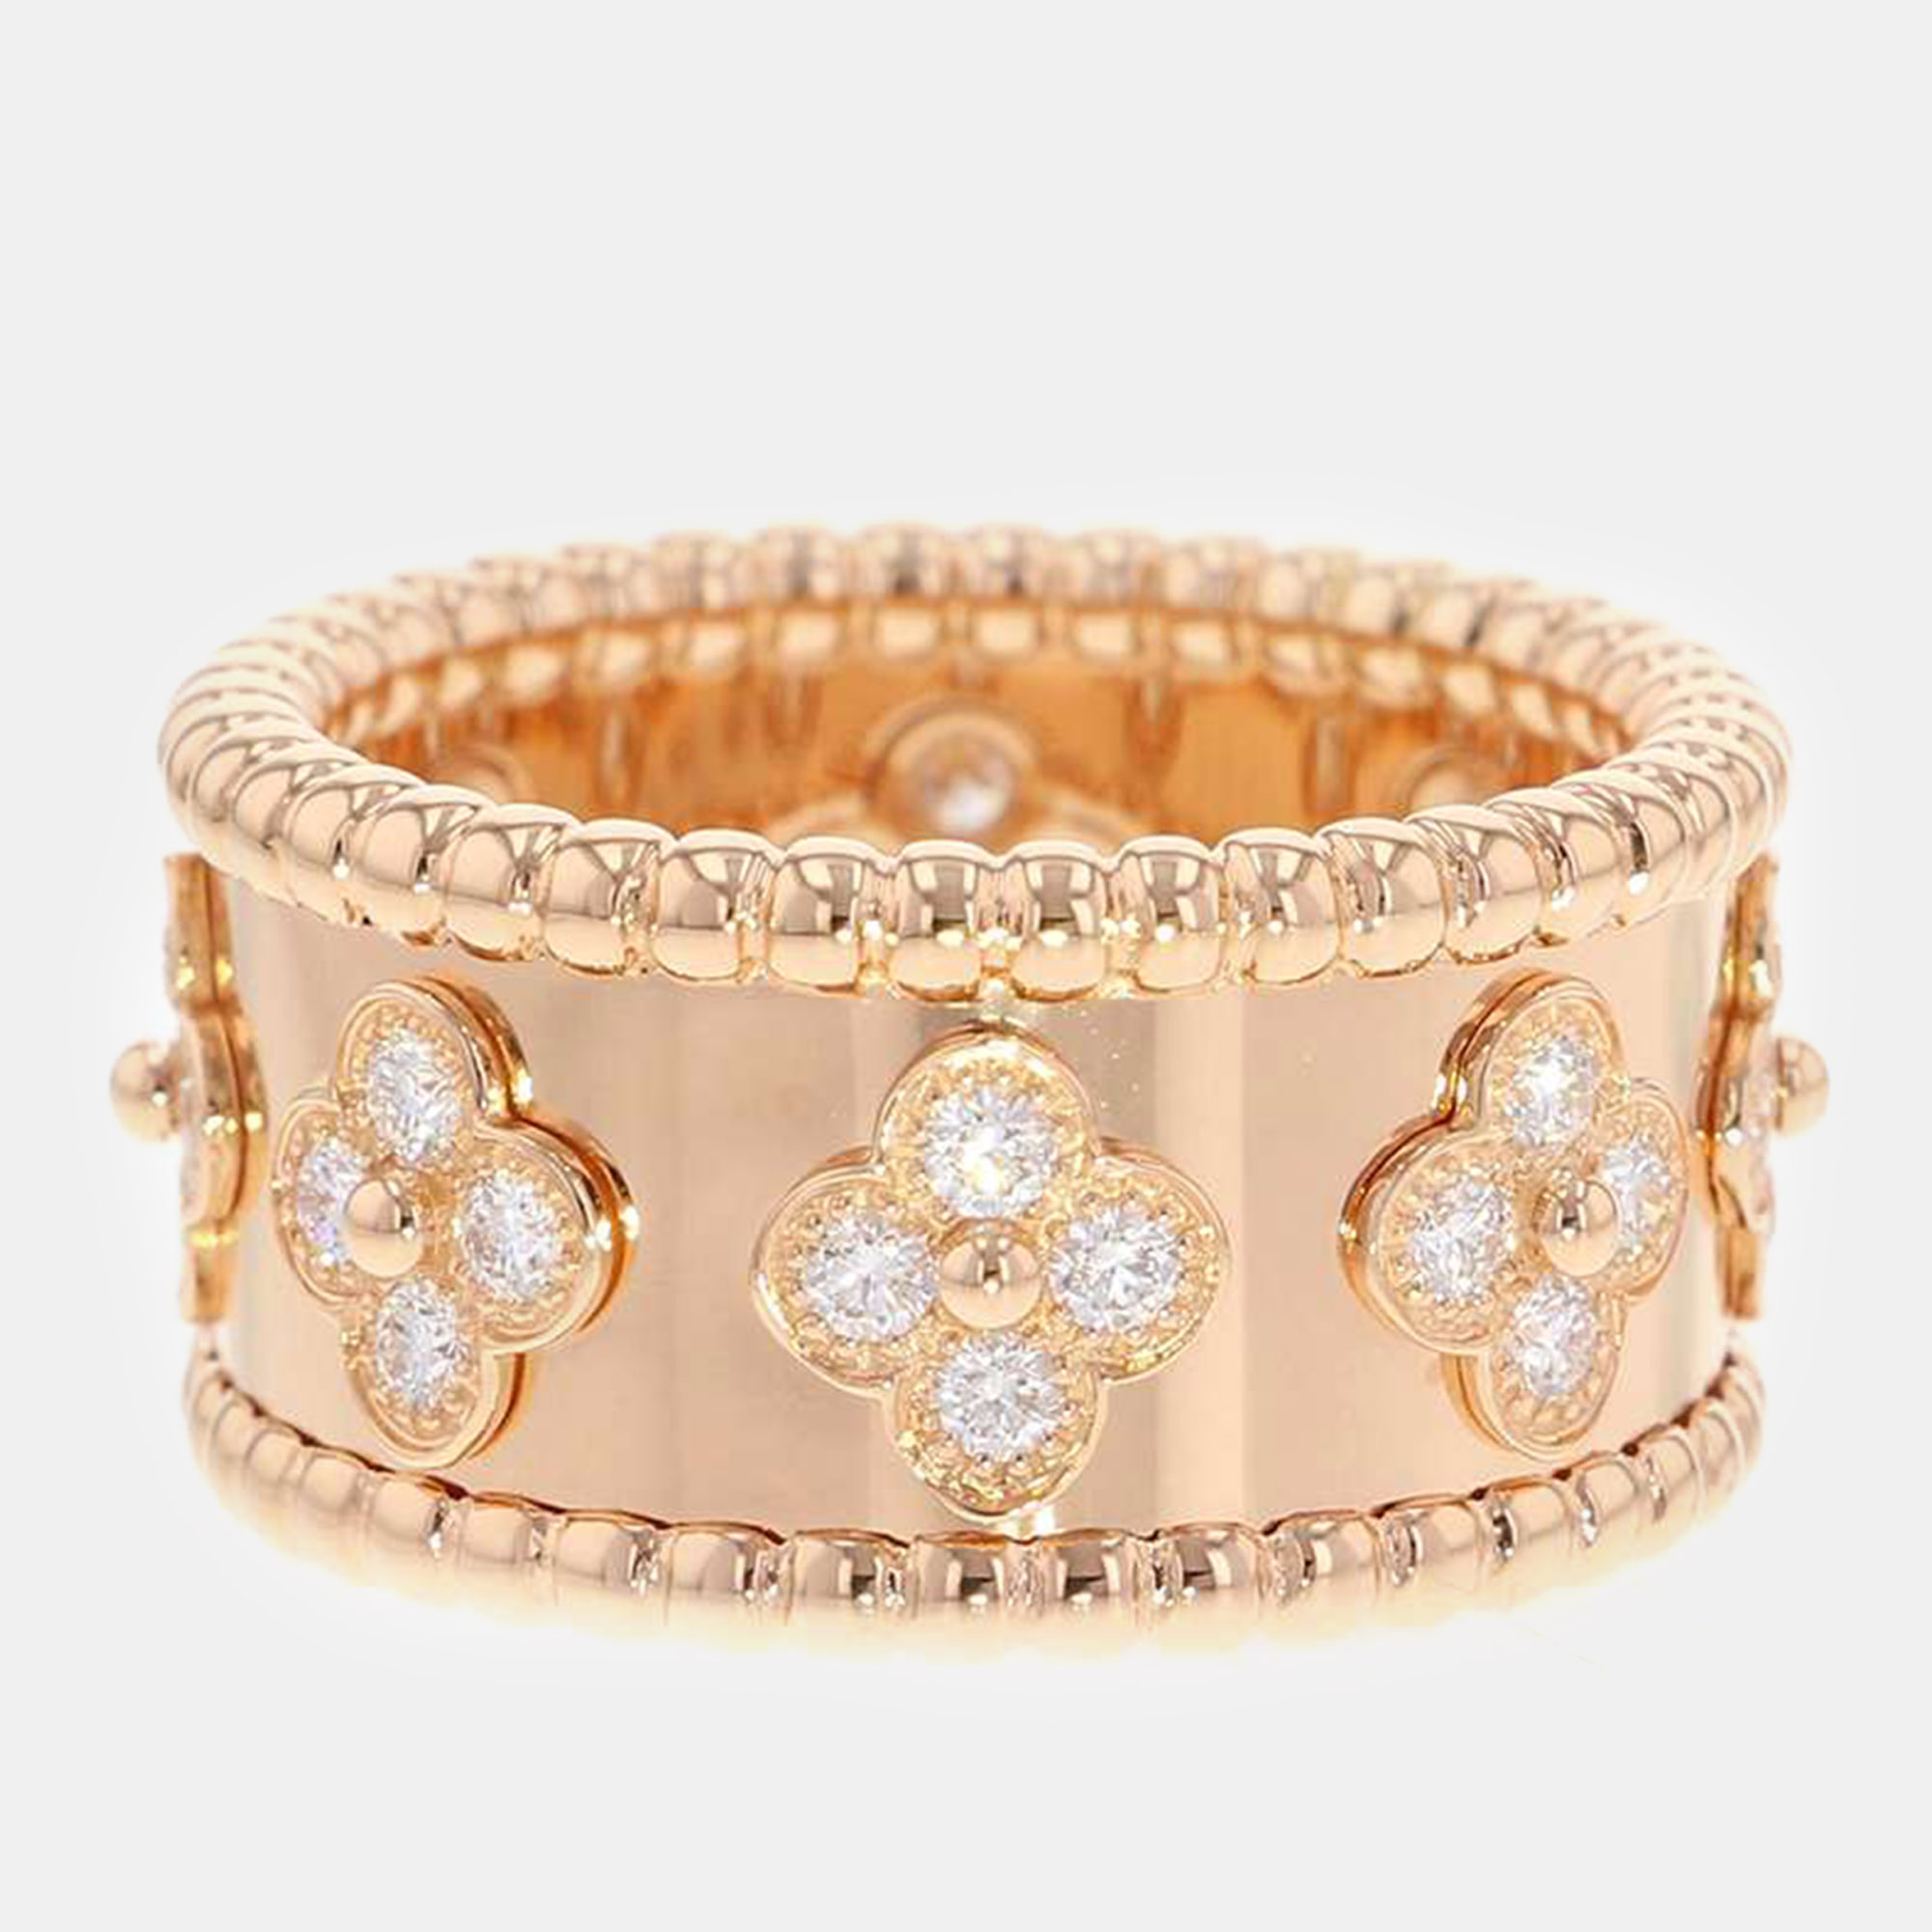 Van cleef & arpels 18k rose gold and diamond large perl&eacute;e clover band ring eu 53